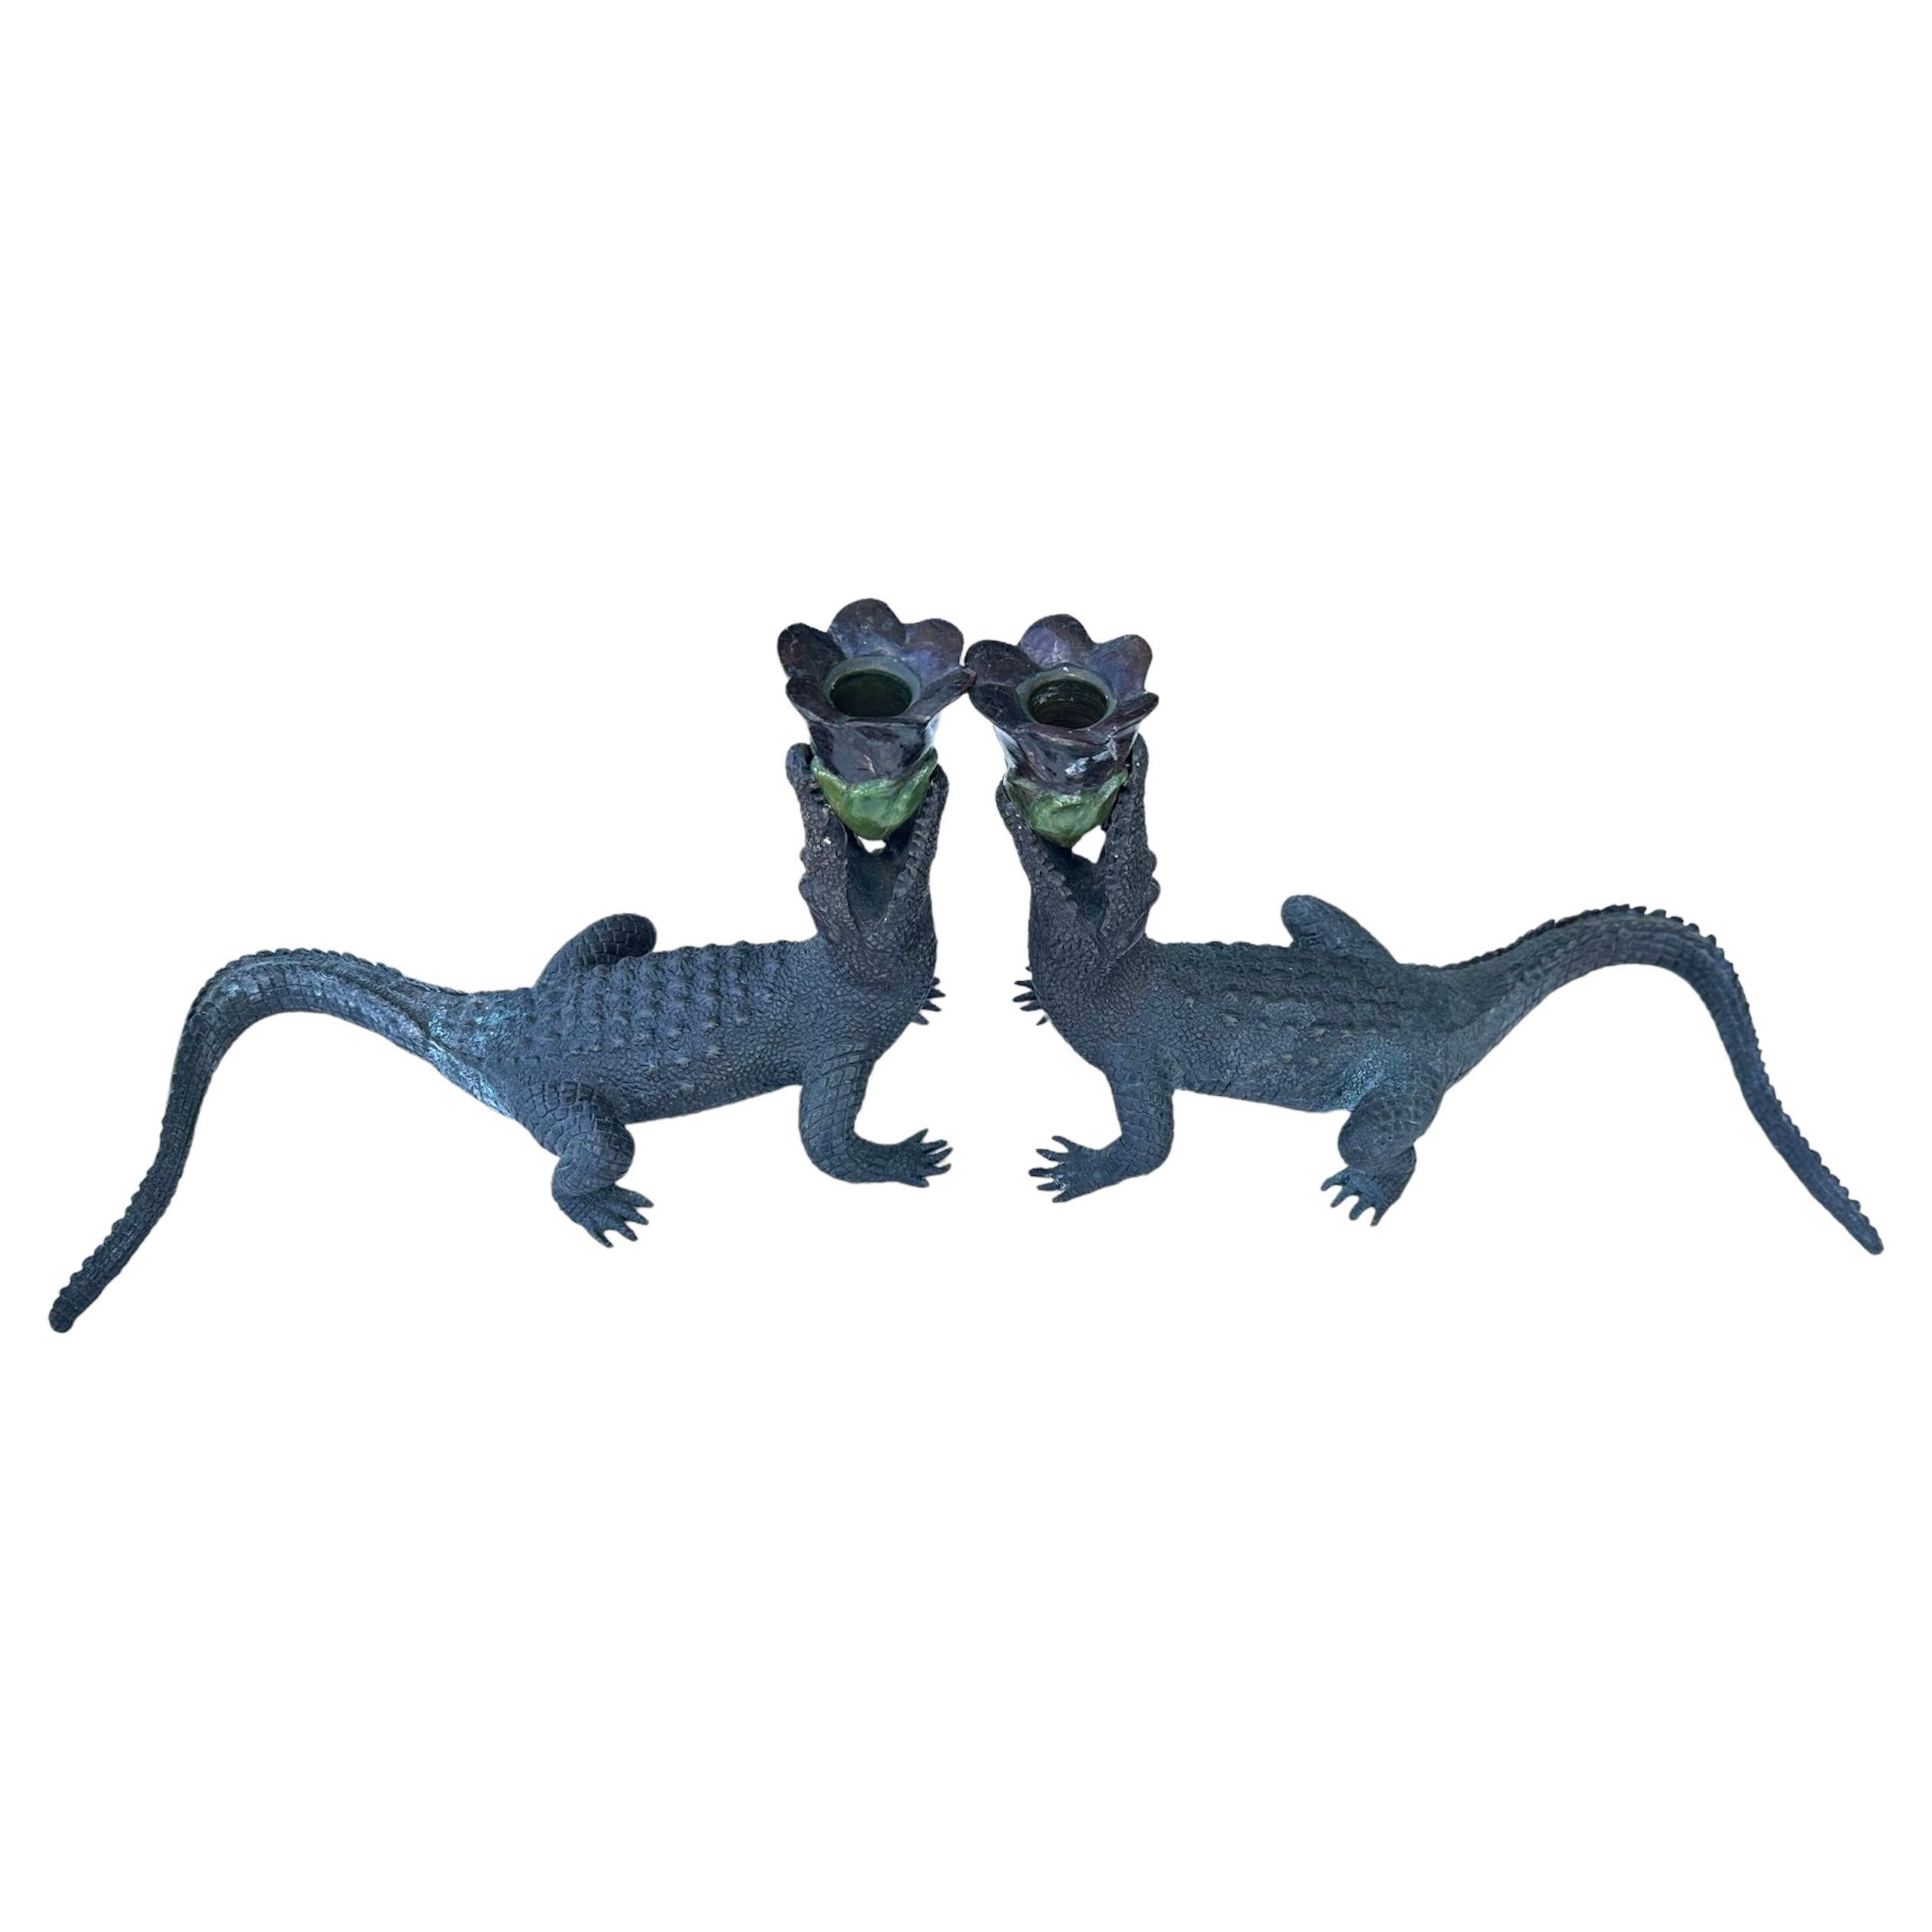 Maitland Smith Alligator Candle Holders For Sale